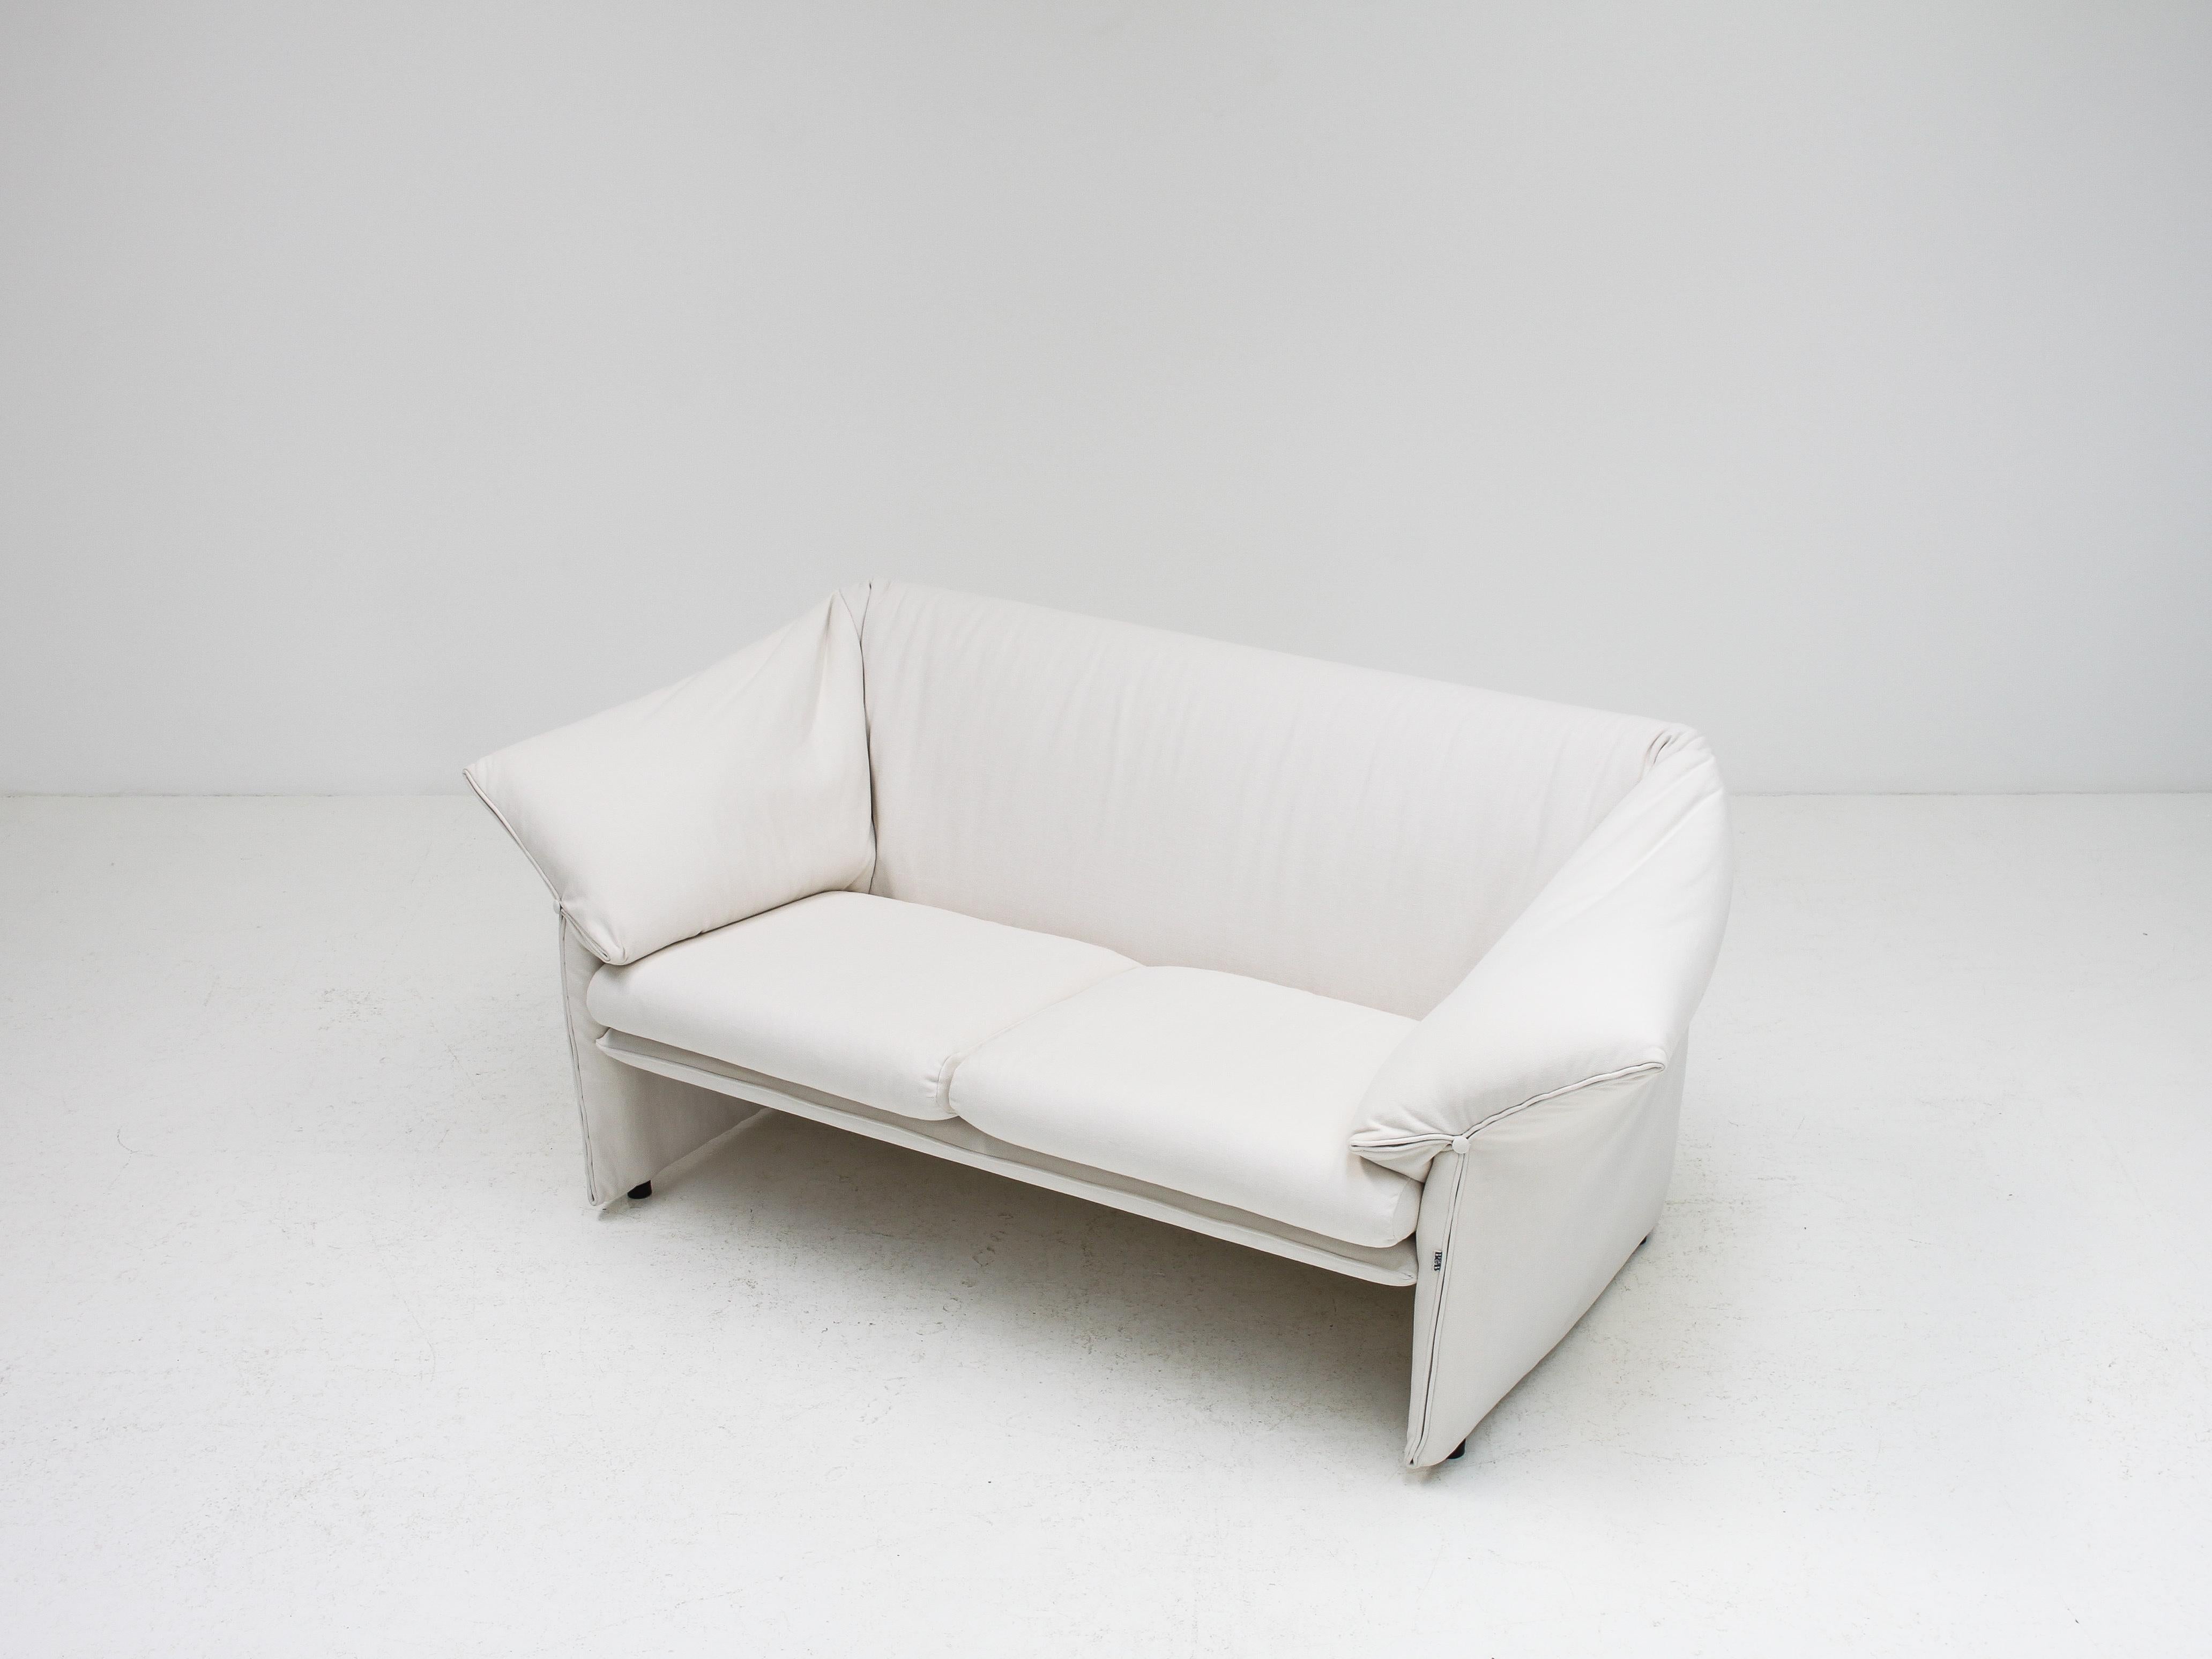 20th Century  'Le Stelle' Loveseat Sofa by Mario Bellini for B&B Italia, 1974, Reupholstered